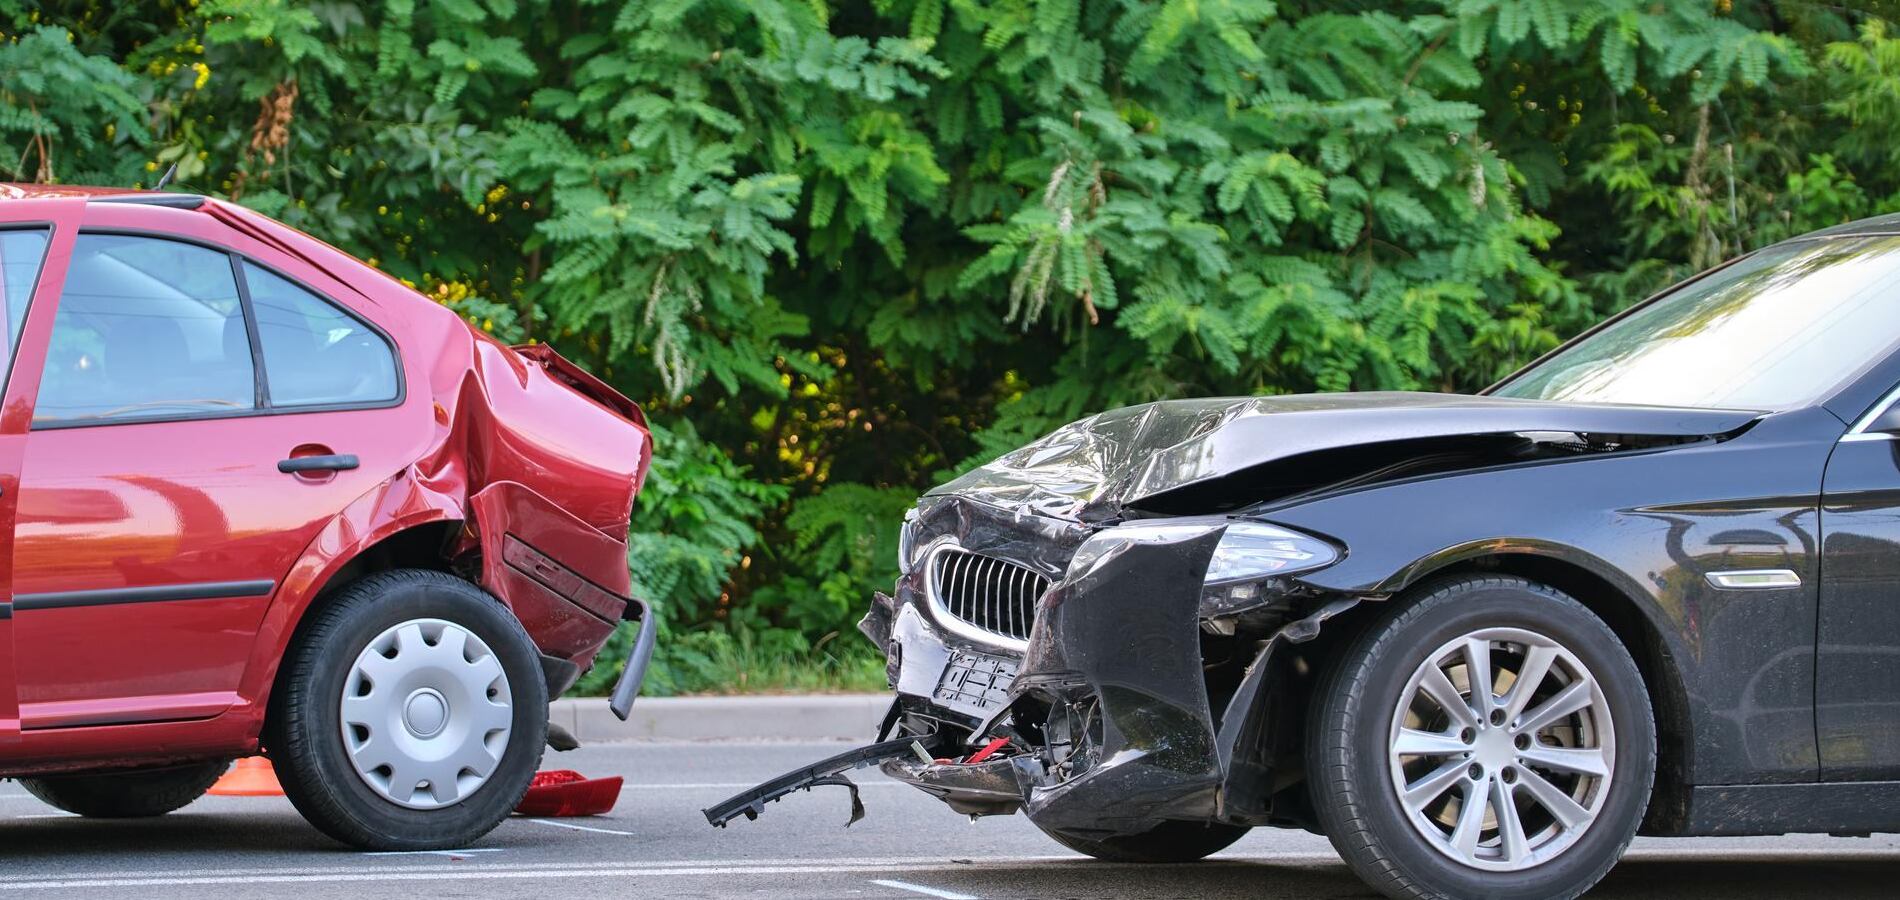 Car Accident Lawyer in Irvine, CA